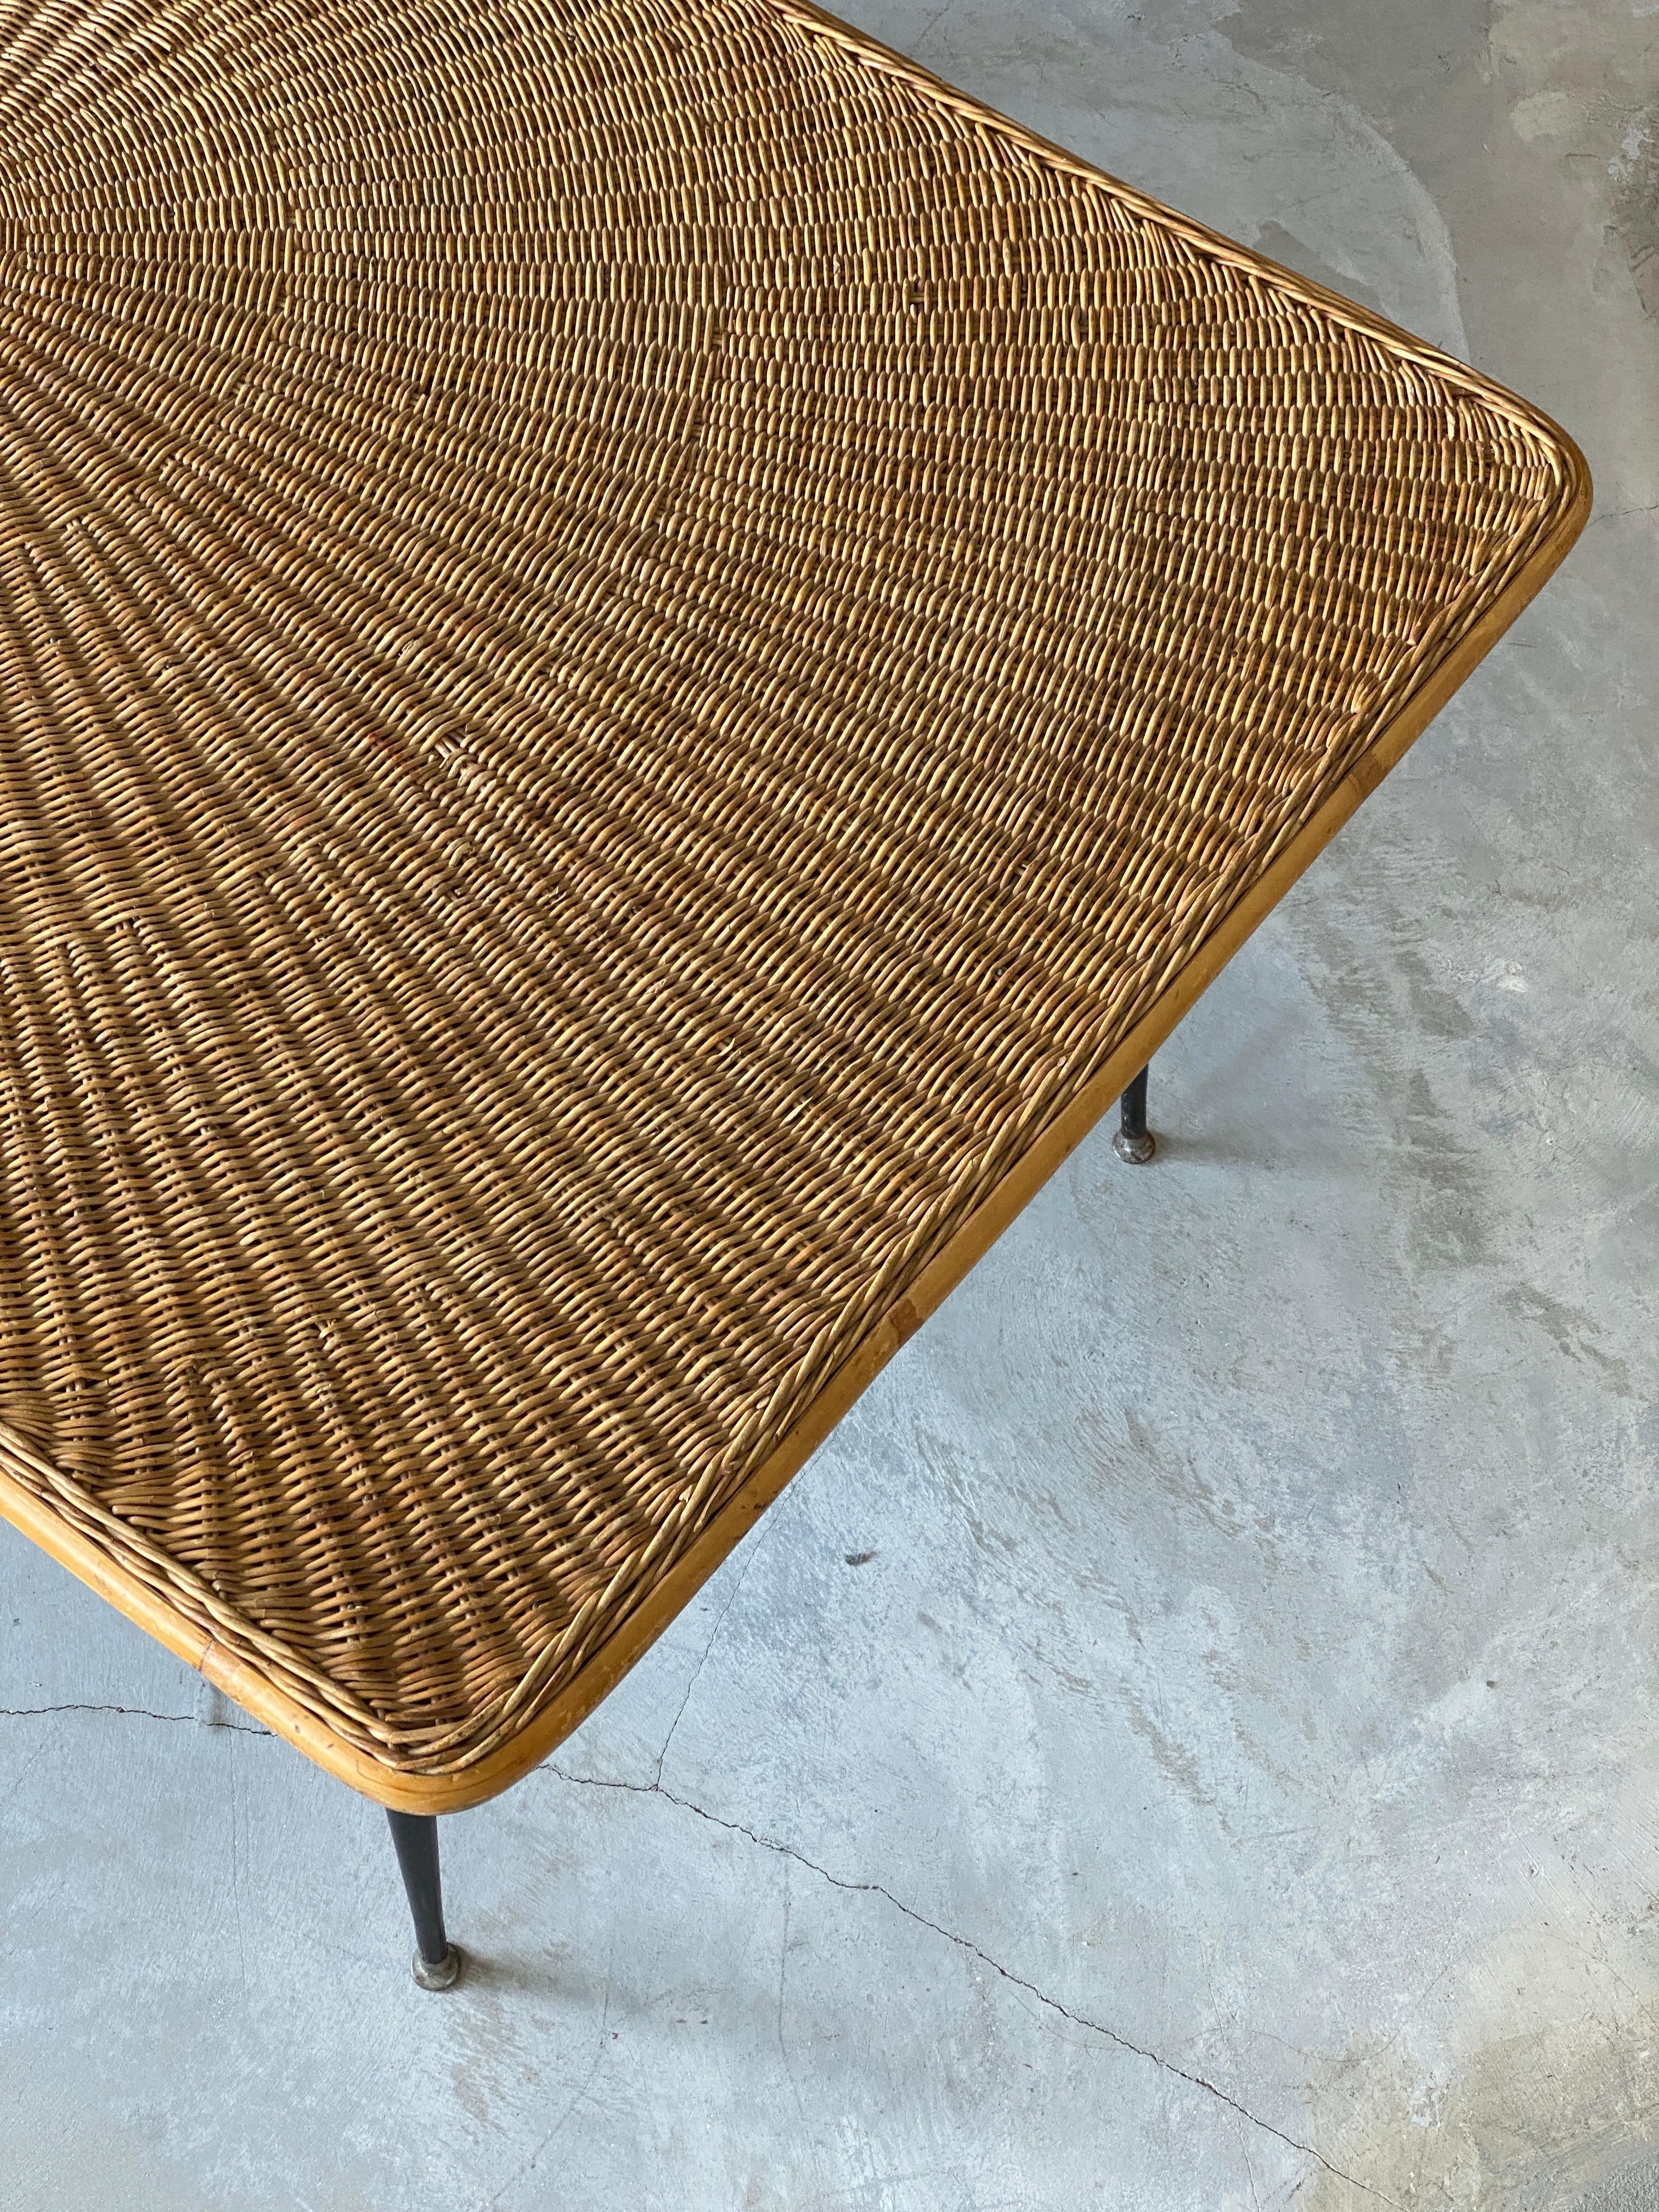 Metal American Designer, Minimalist Dining Table, Woven Rattan, Lacquered Steel, 1950s